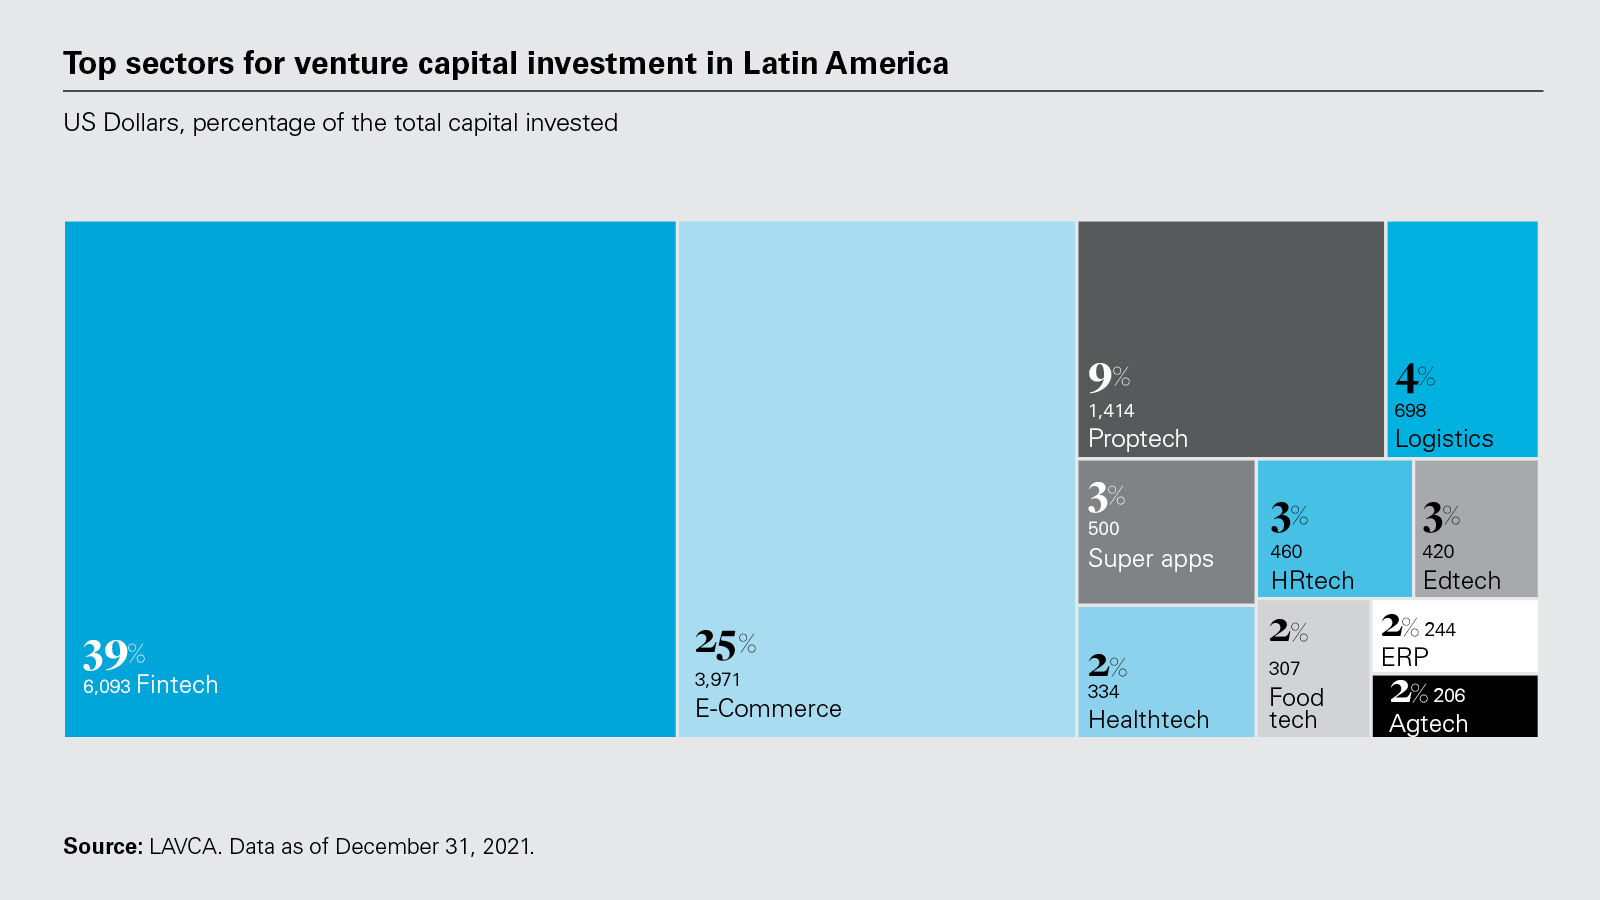 Top sectors for venture capital investment in Latin America